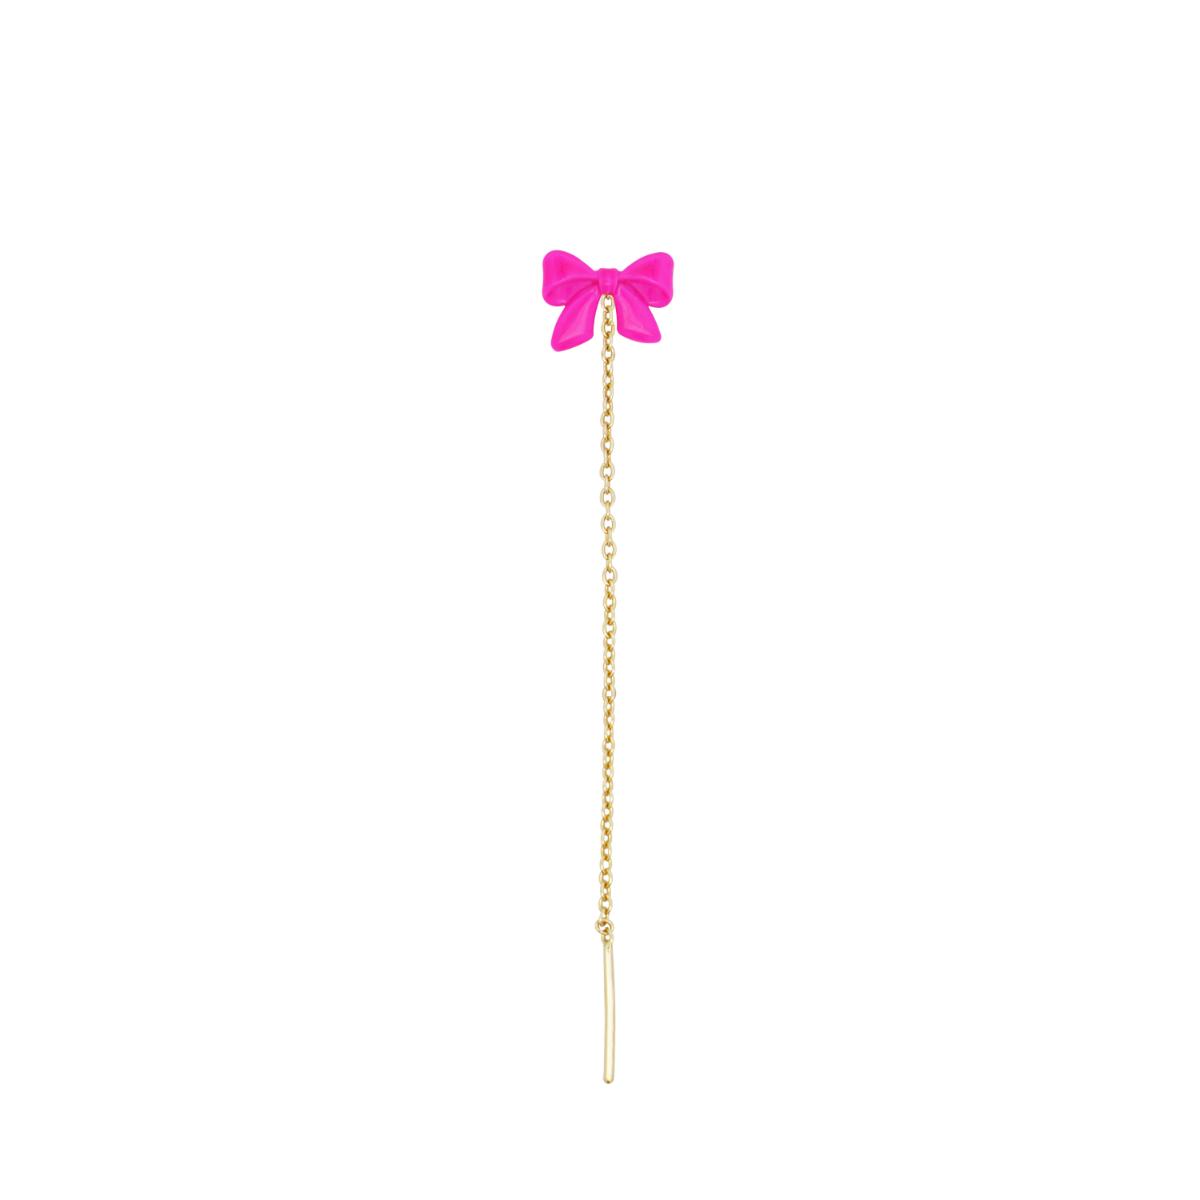 Single earring with dangling chain and bow neon pink - CANDY BOW